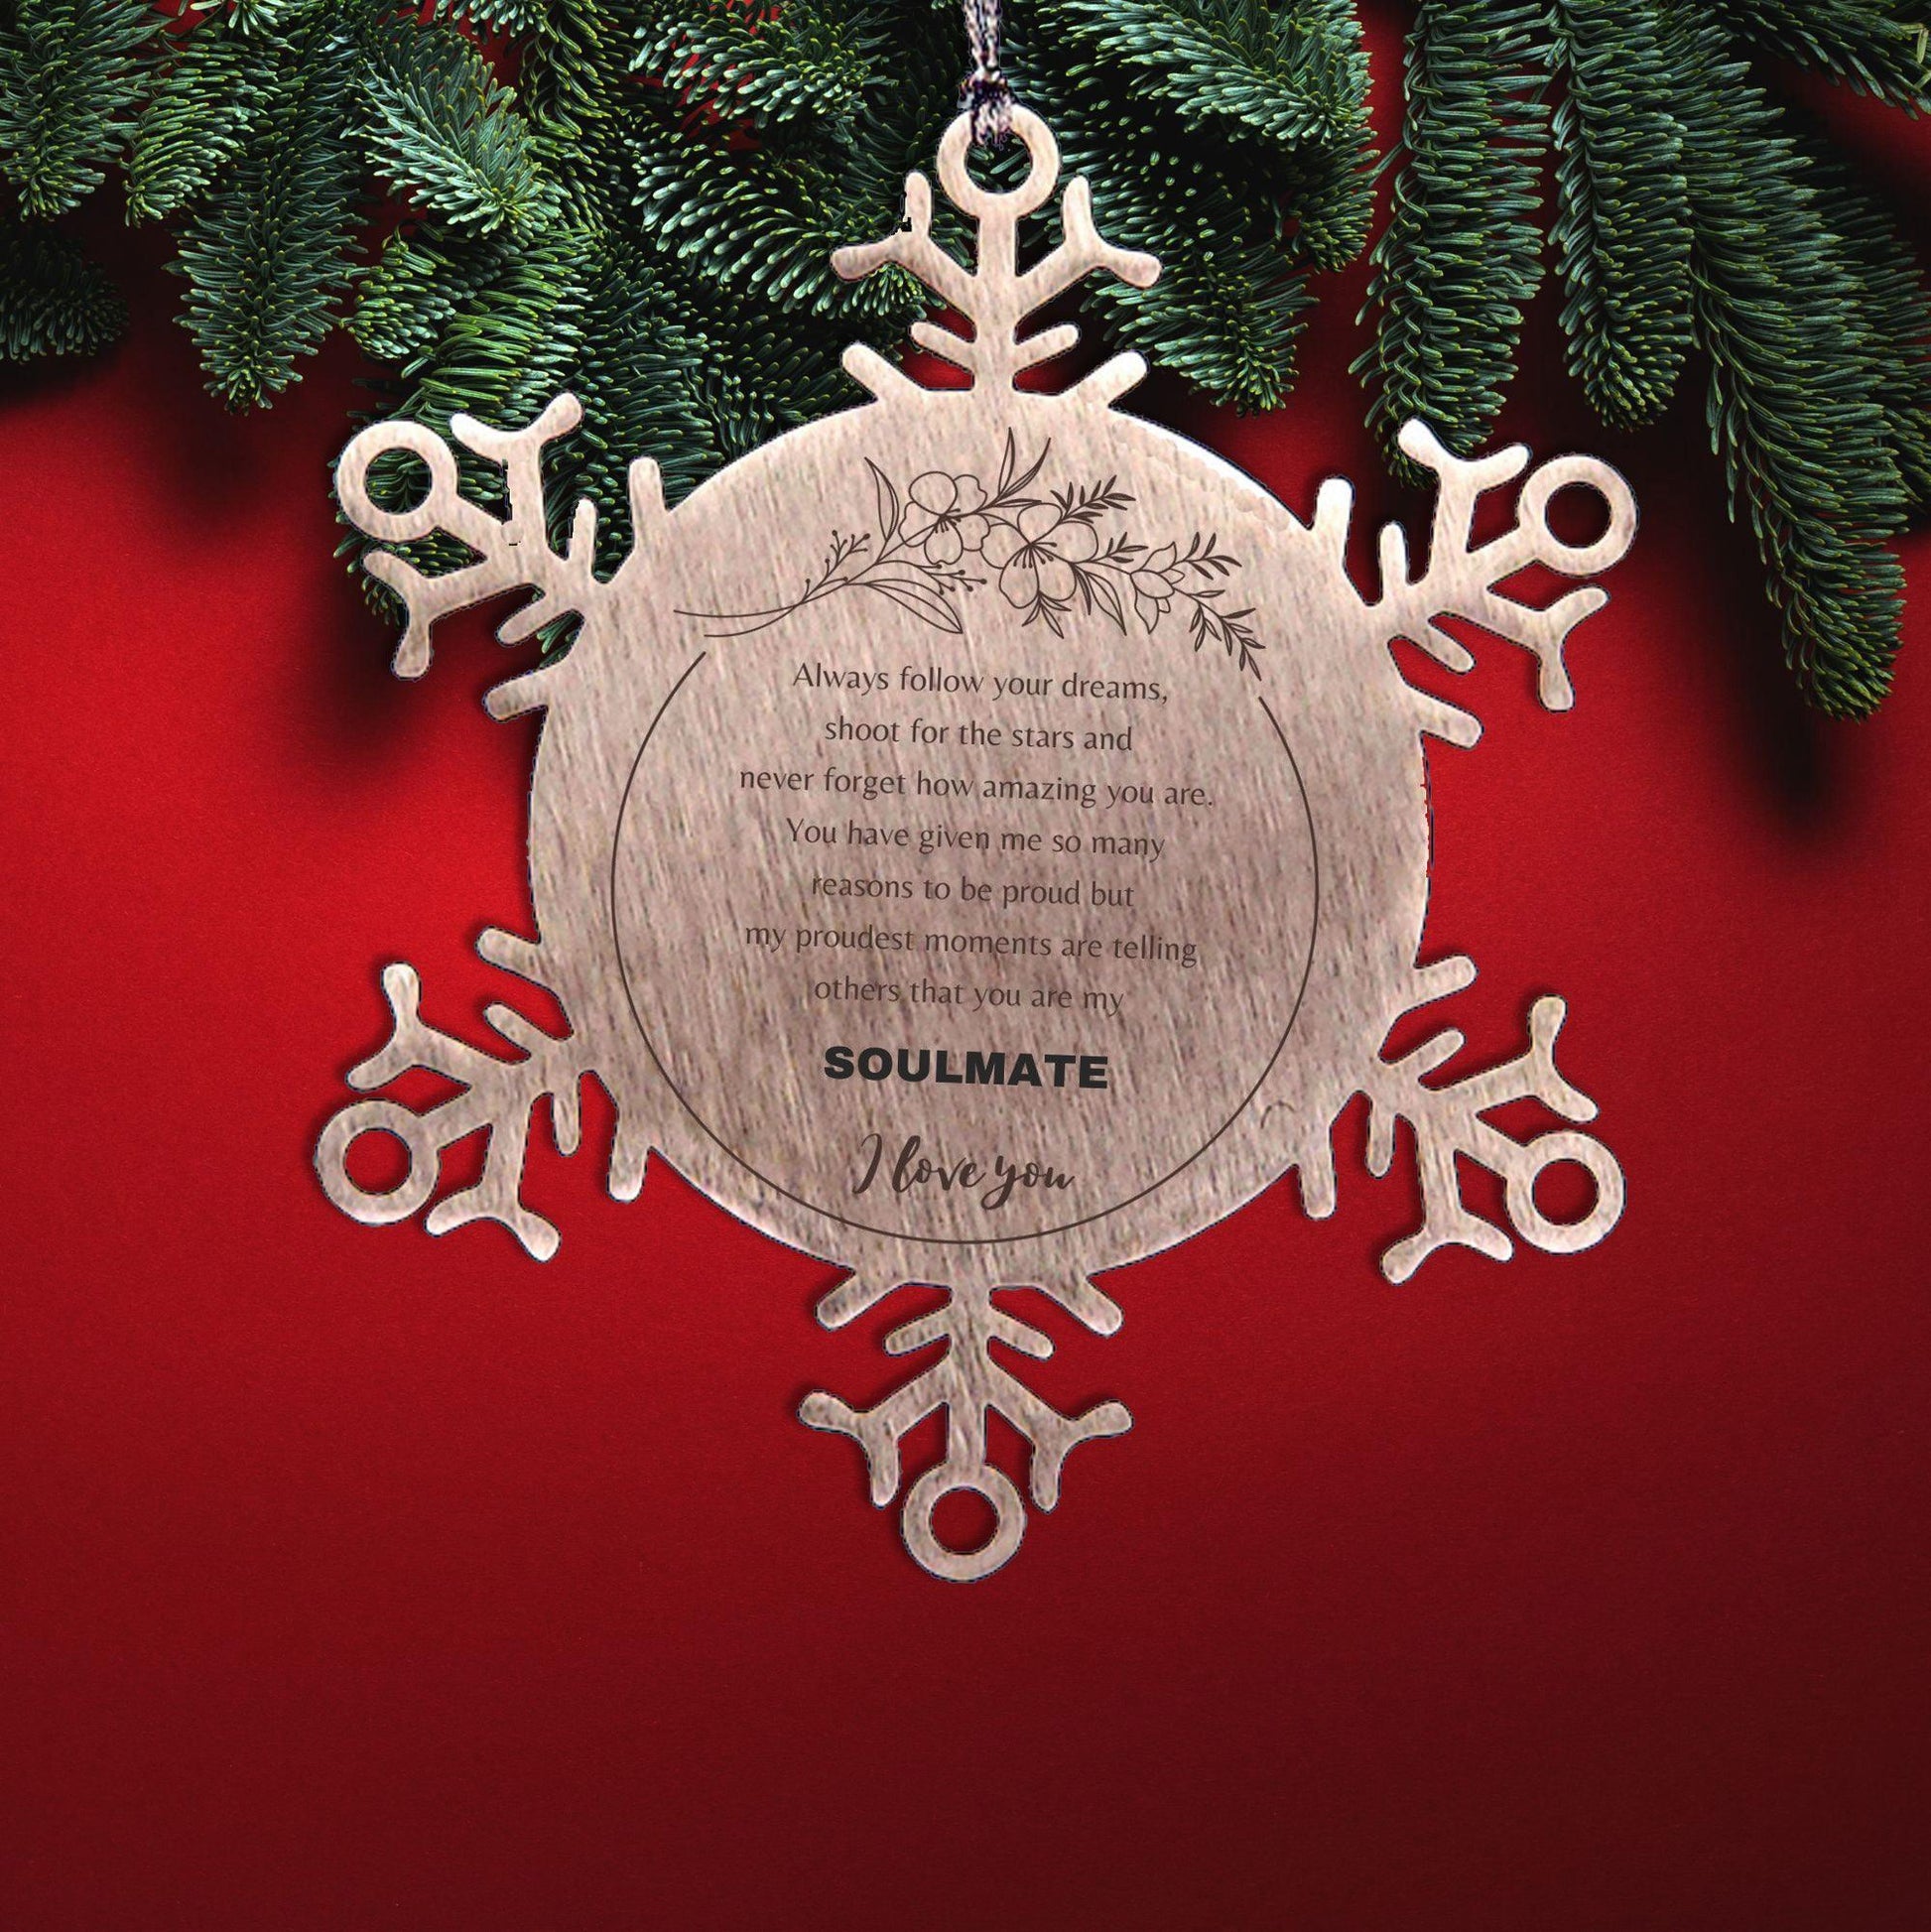 Motivational Soulmate Snowflake Engraved Ornament - Always follow your dreams, never forget how amazing you are- Birthday, Christmas Holiday Gifts - Mallard Moon Gift Shop